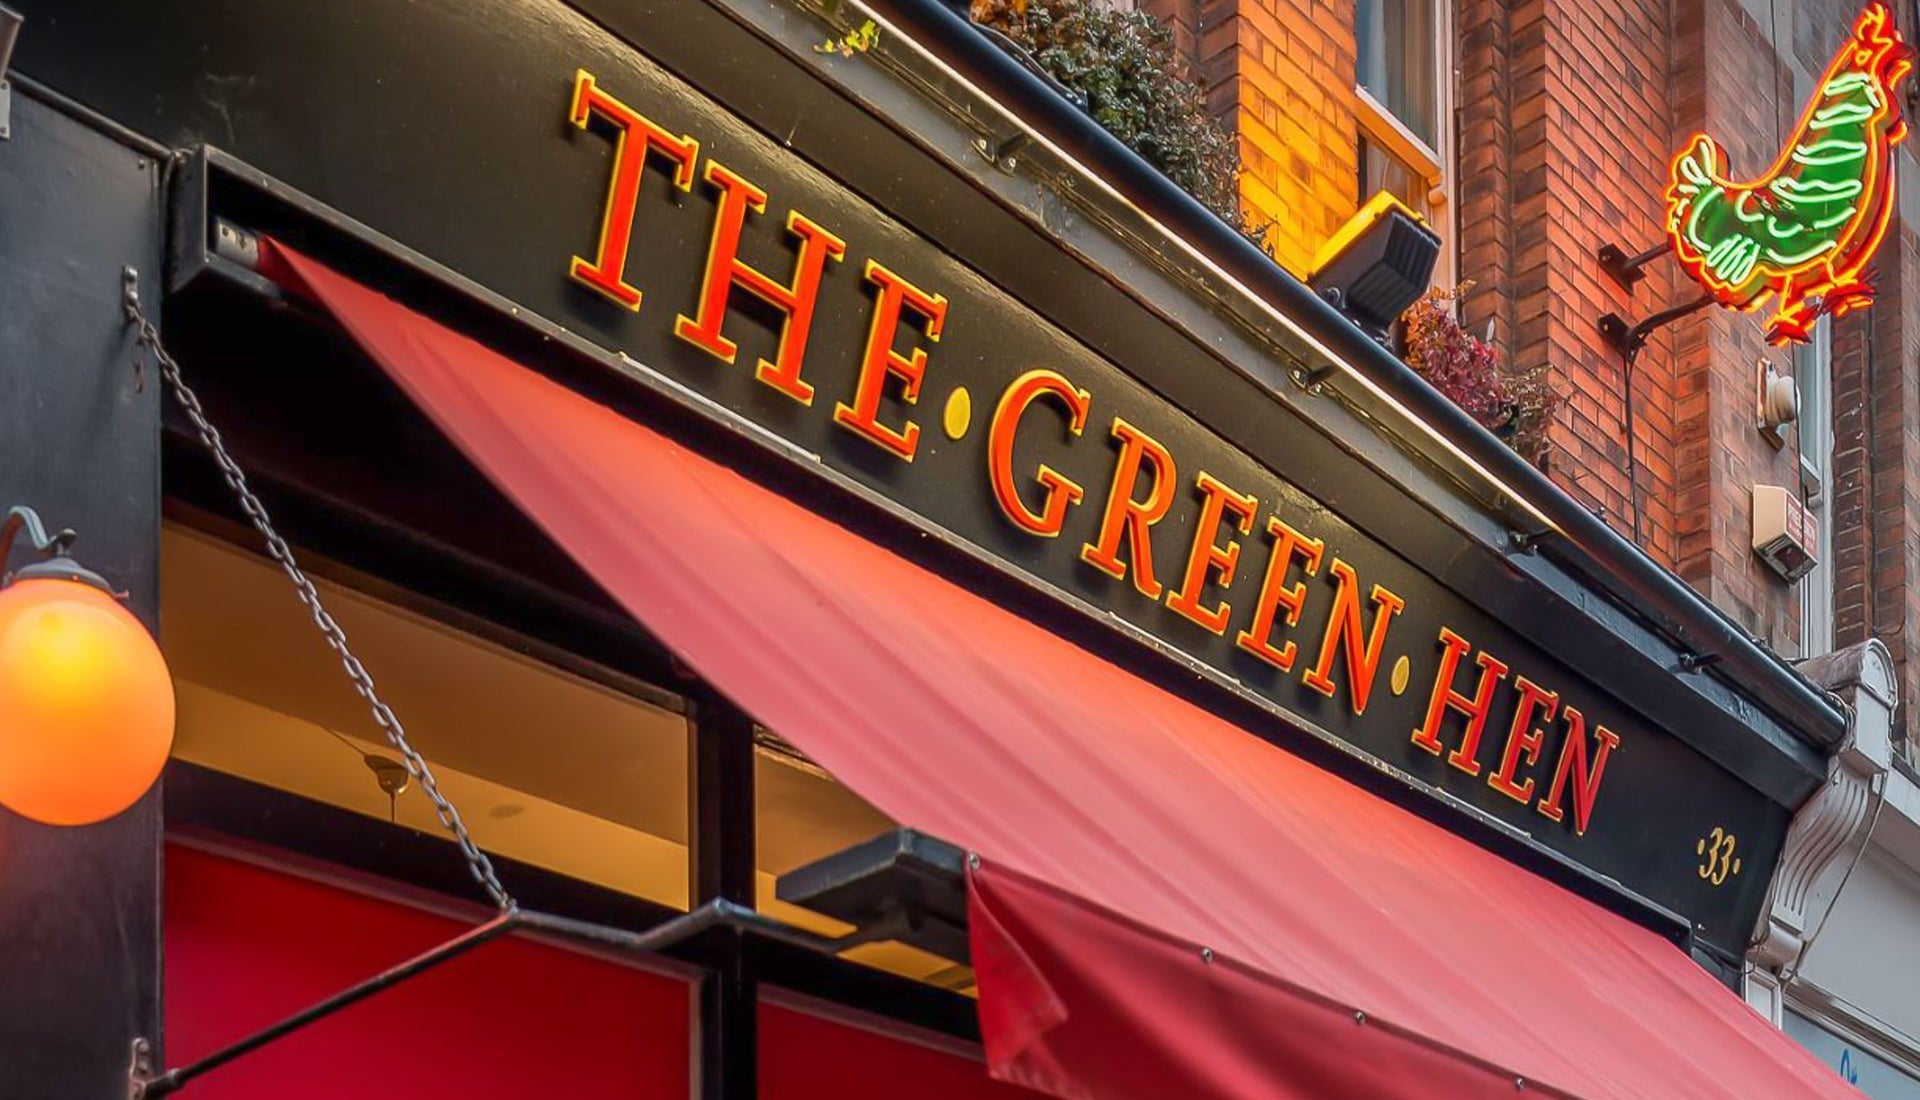 View of front exterior of The Green Hen